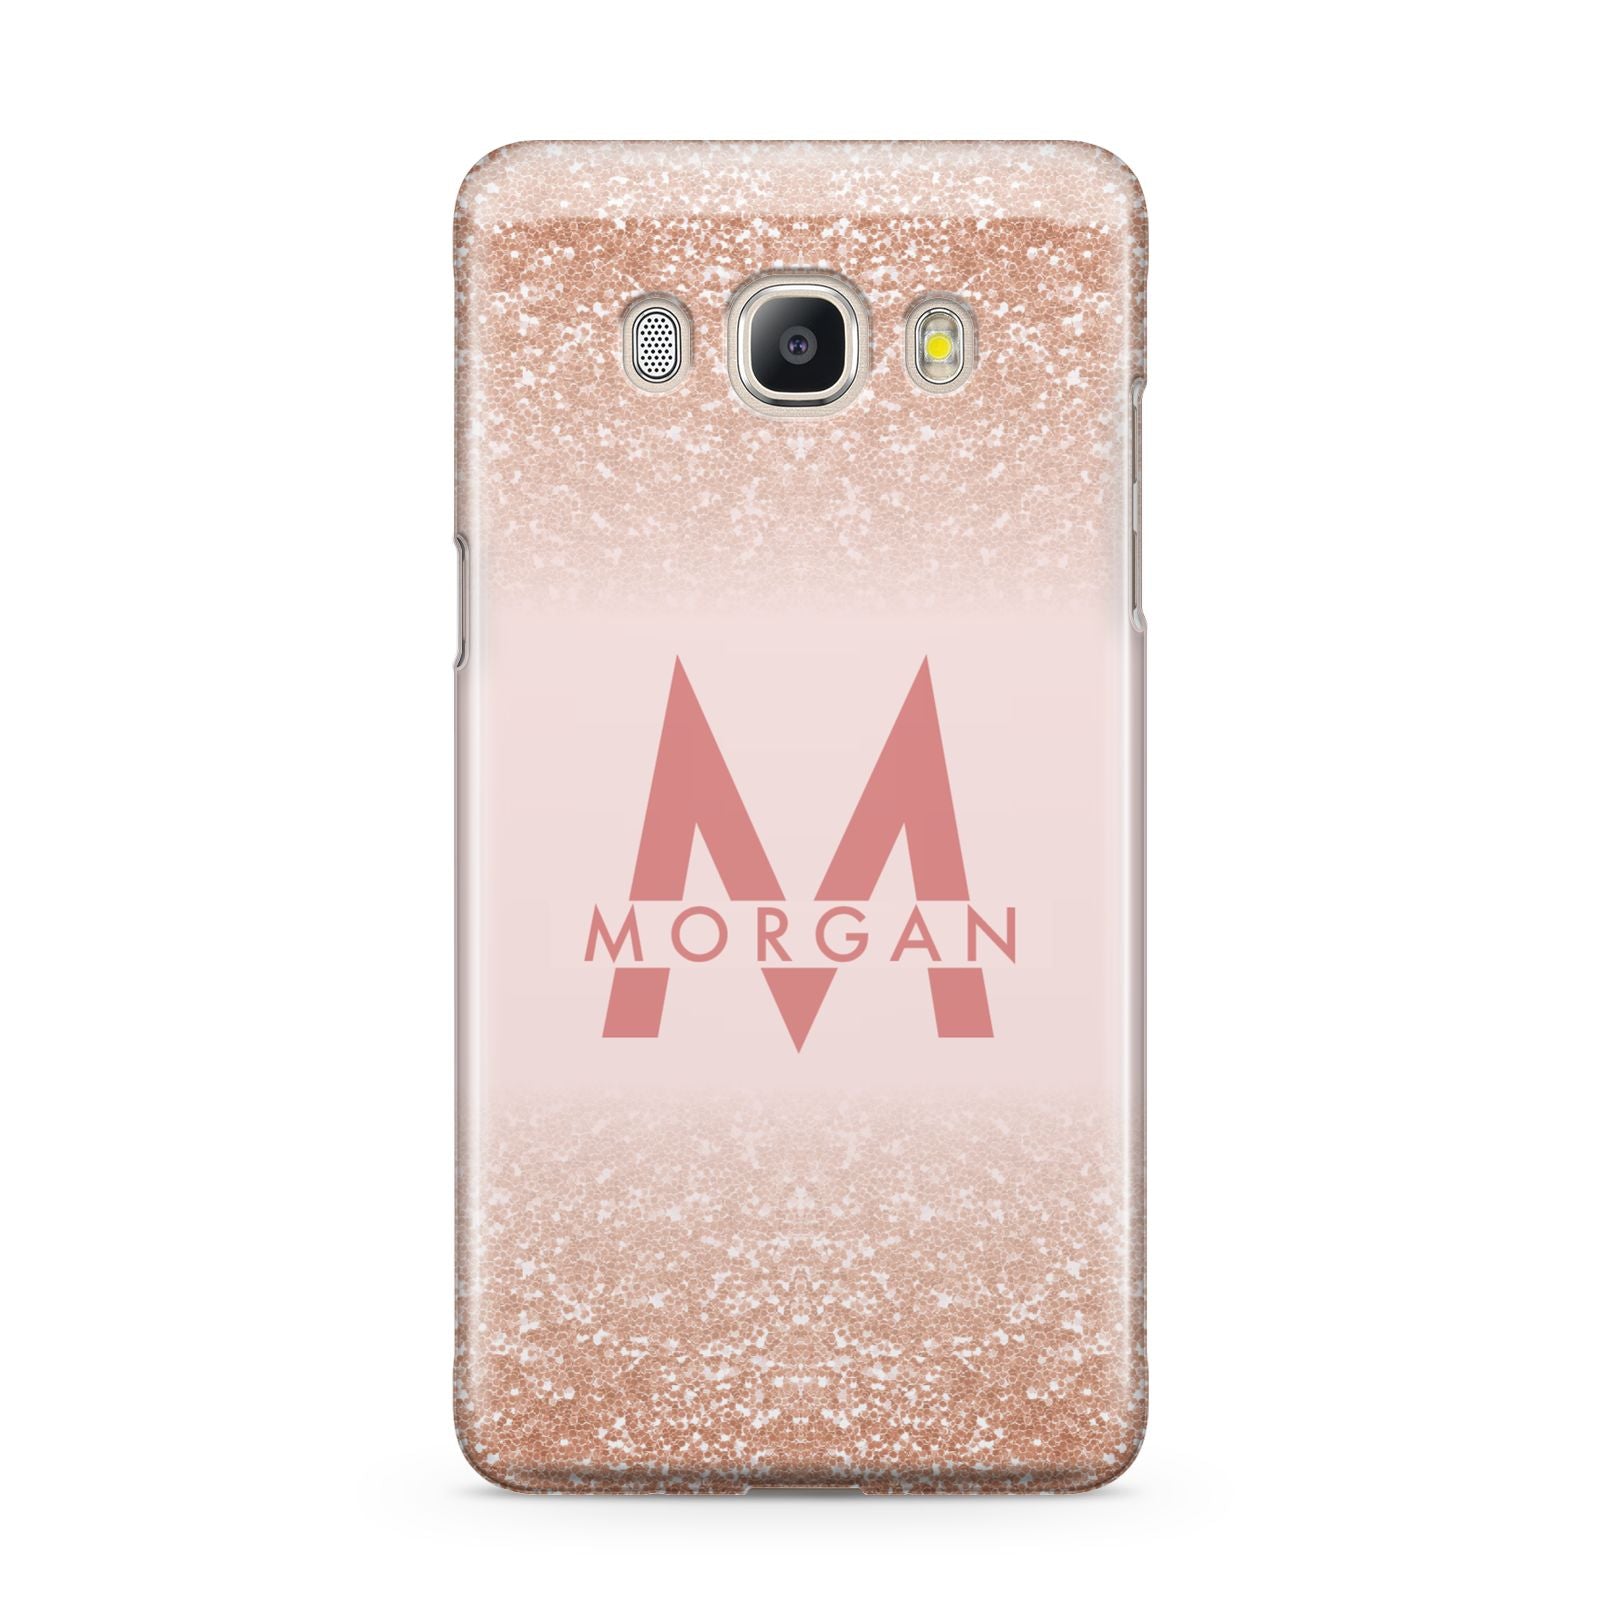 Personalised Printed Glitter Name Initials Samsung Galaxy J5 2016 Case